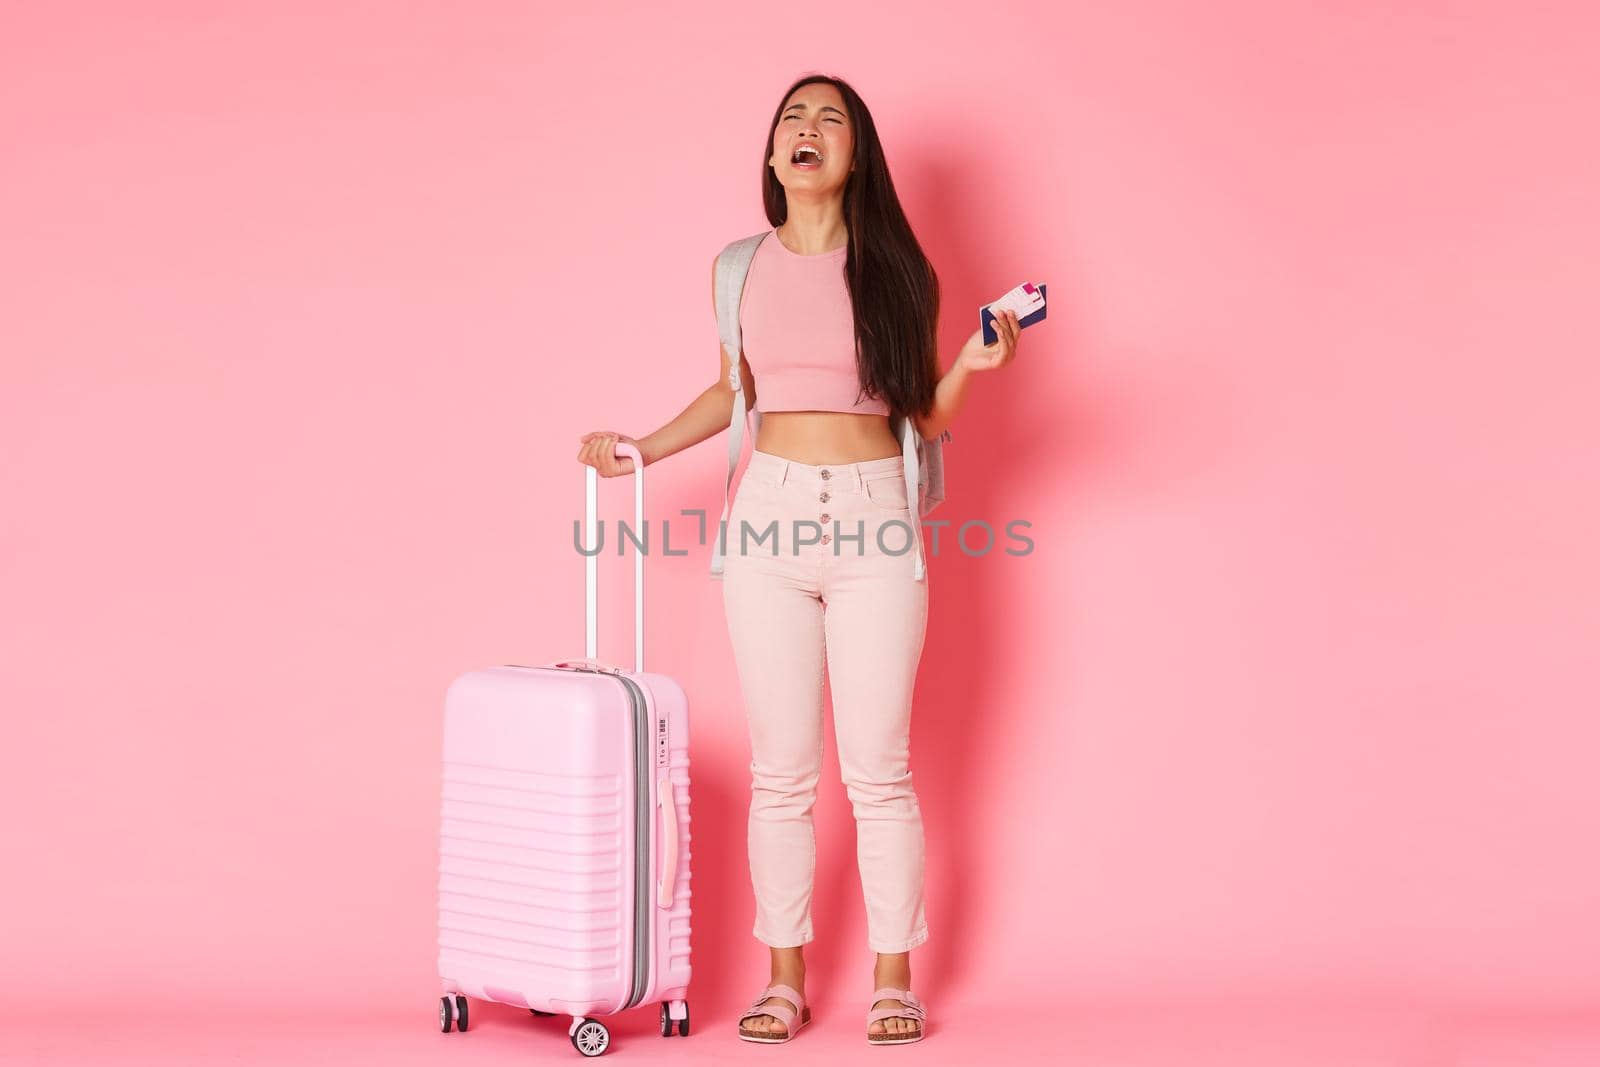 Travelling, holidays and vacation concept. Full-length of crying, sad and distressed asian girl tourist, feeling depressed about missed flight, standing suitcase and plane tickets, pink background.